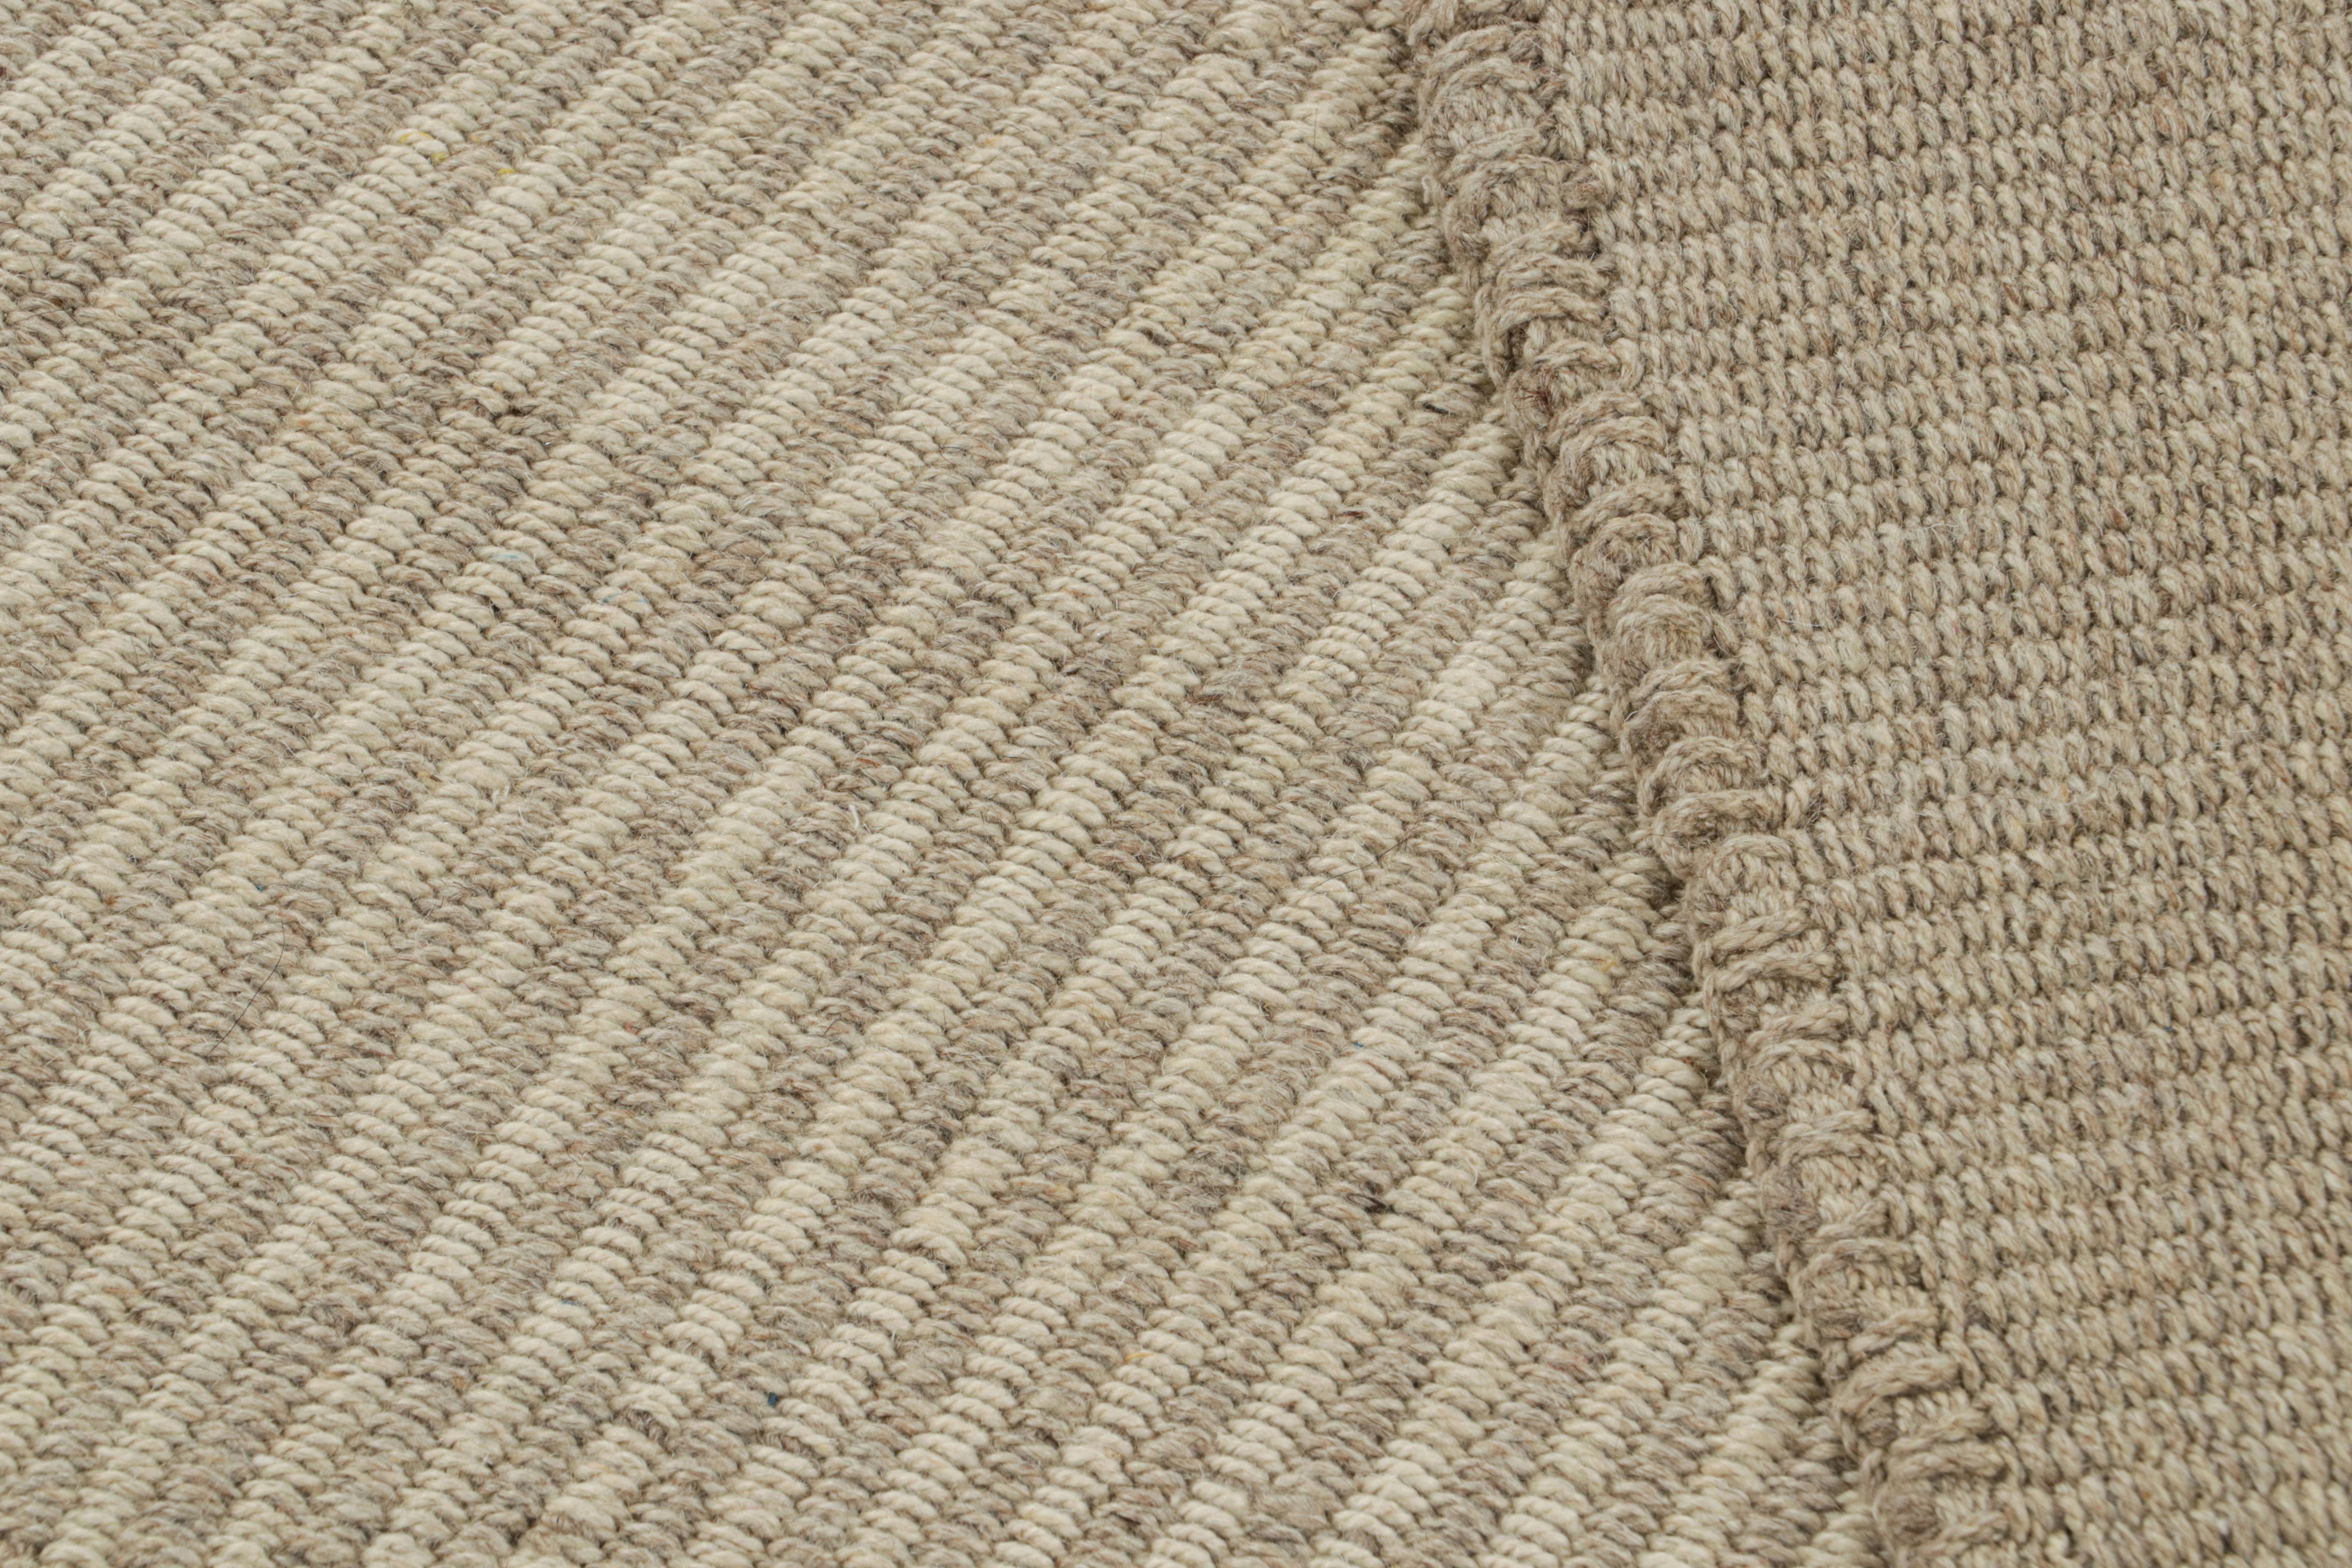 Wool Rug & Kilim’s Contemporary Kilim with Light Beige-Brown Textural Stripes  For Sale